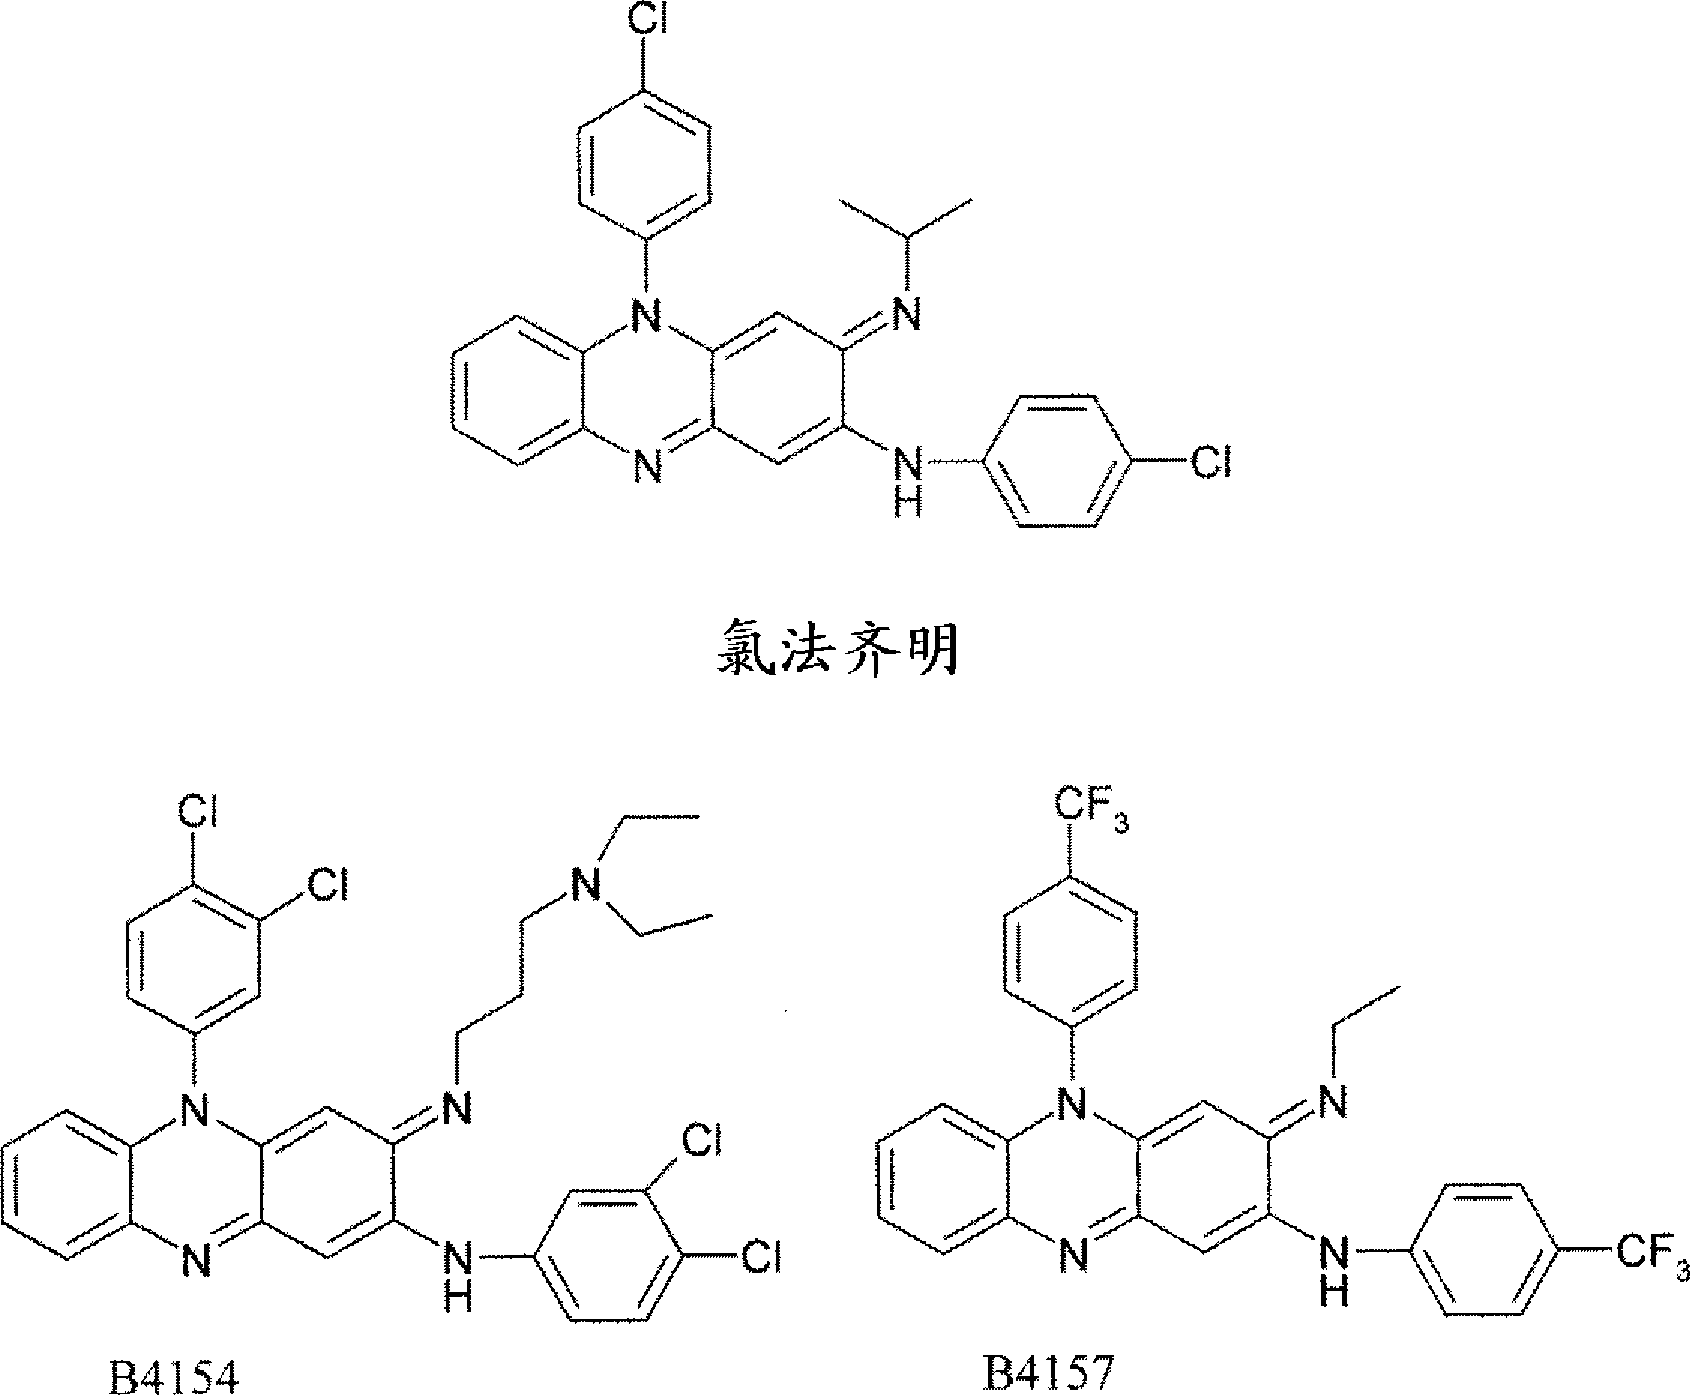 Riminophenazines with 2-(heteroaryl)amino substituents and their anti-microbial activity